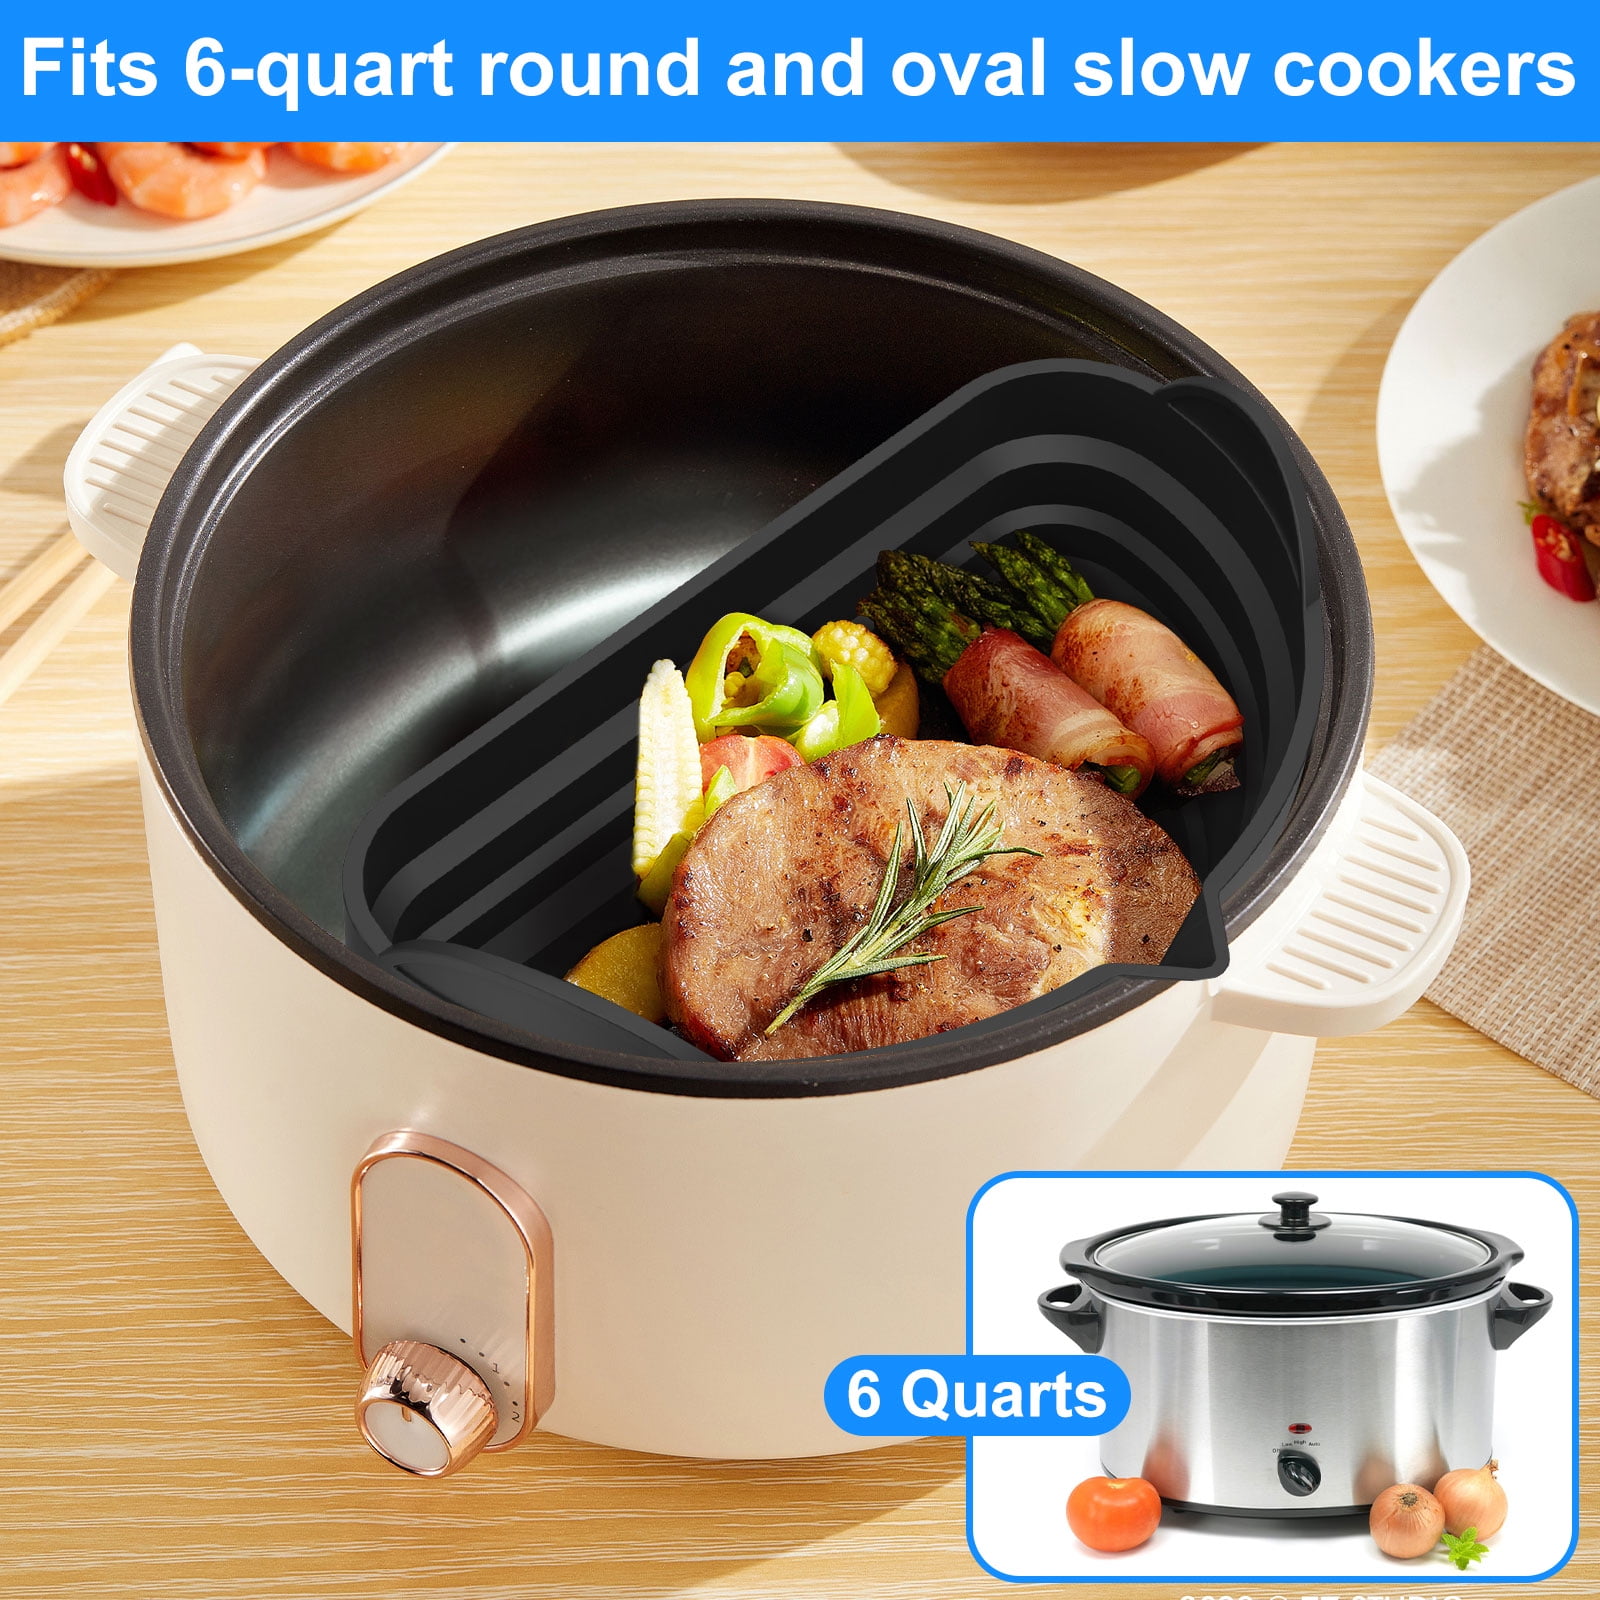 1 Silicone Slow Cooker Divider Liners For 6qt 7qt 8qt Oval - Temu